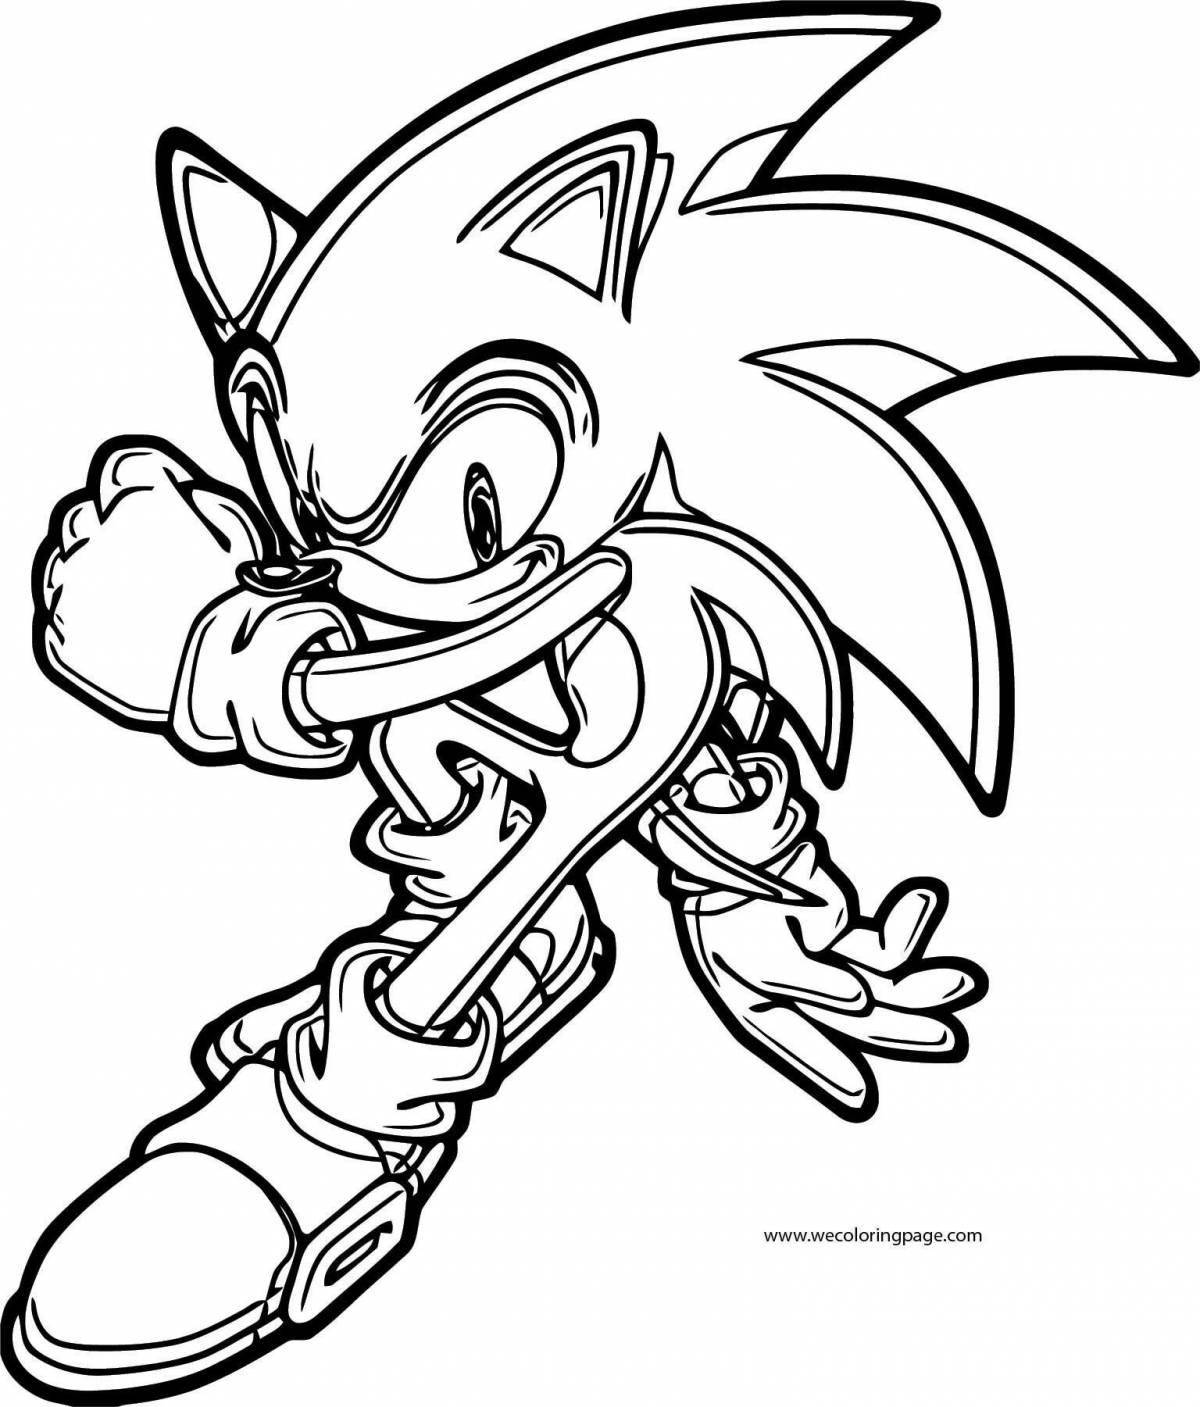 Sonic theos dazzling coloring book